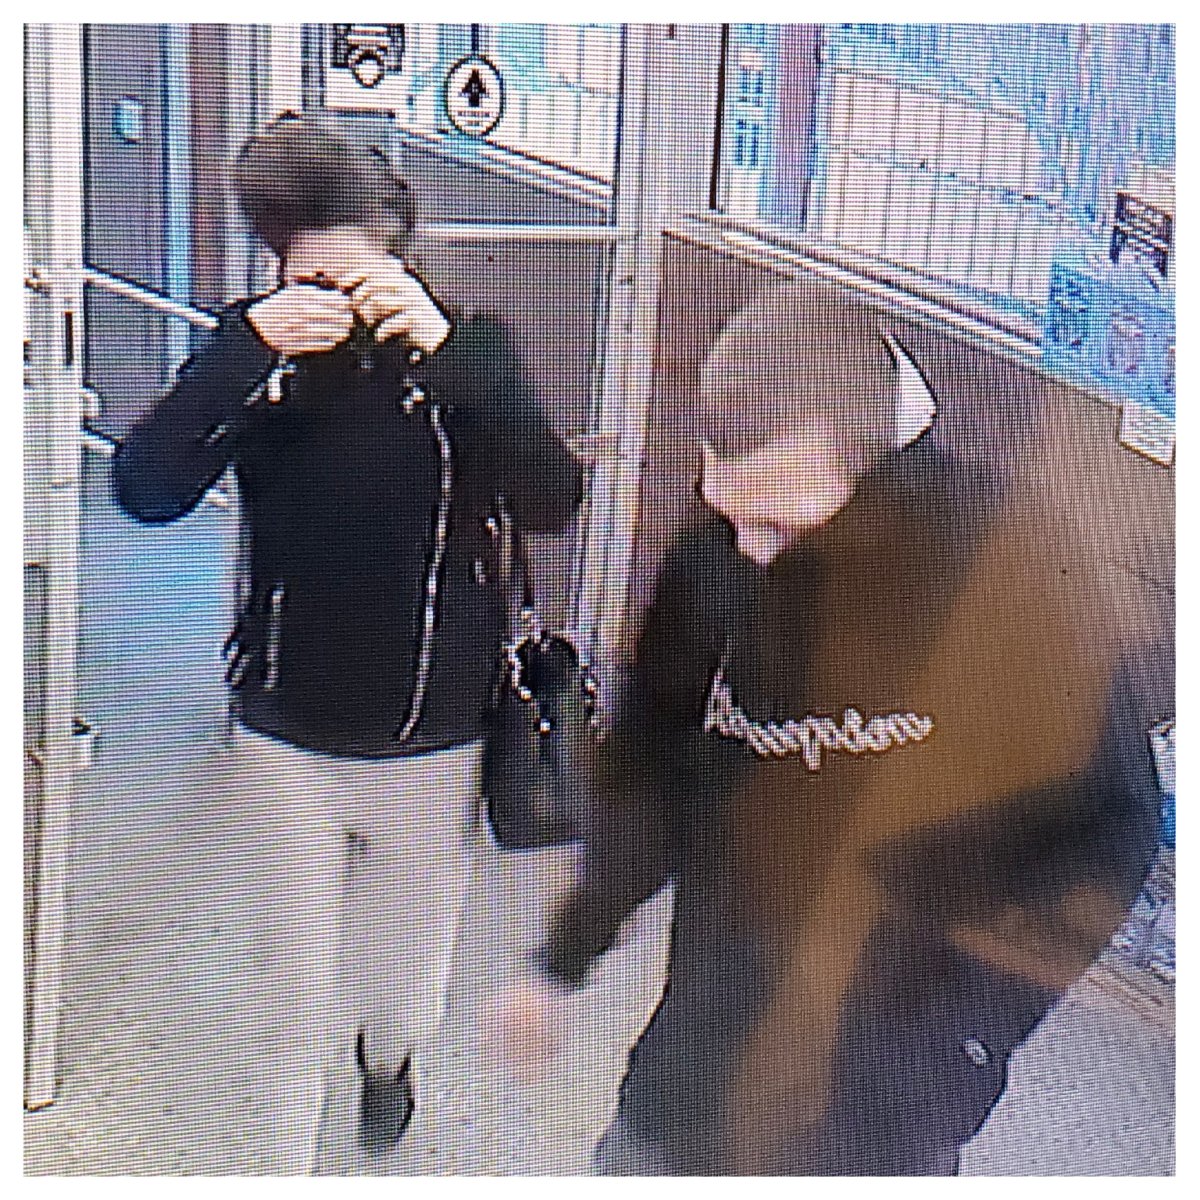 Police in Lindsay are looking for two suspects after a theft and assault at a grocery store.